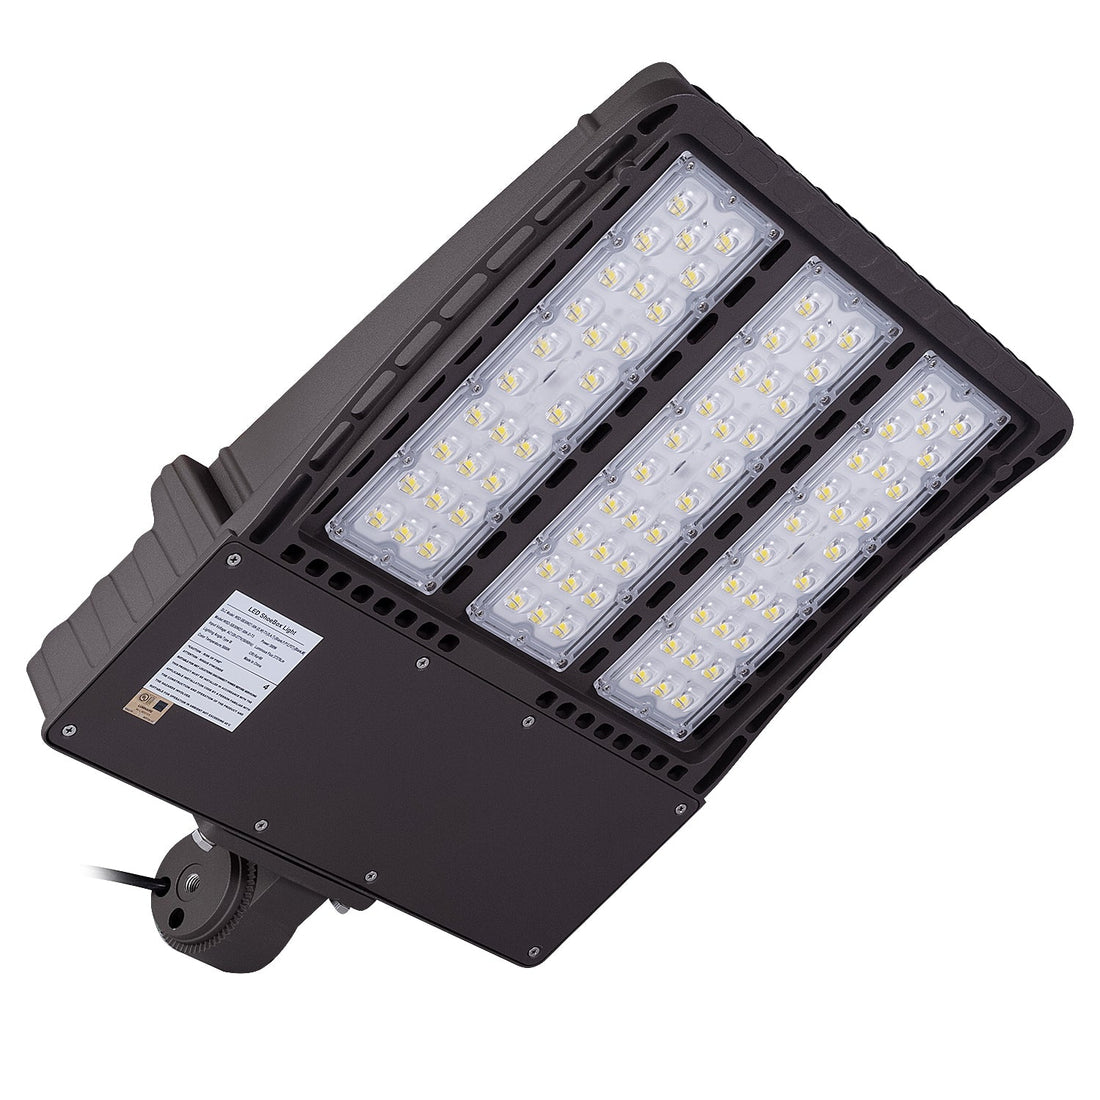 LED Shoebox Light with 300W  for Outdoor Street Area Lighting, 5000K, Direct Mount  - 42132Lumens AC277-480V - 0-10V Dimmable - IP66 - UL Listed - DLC Premium Listed - 5 Years Warranty